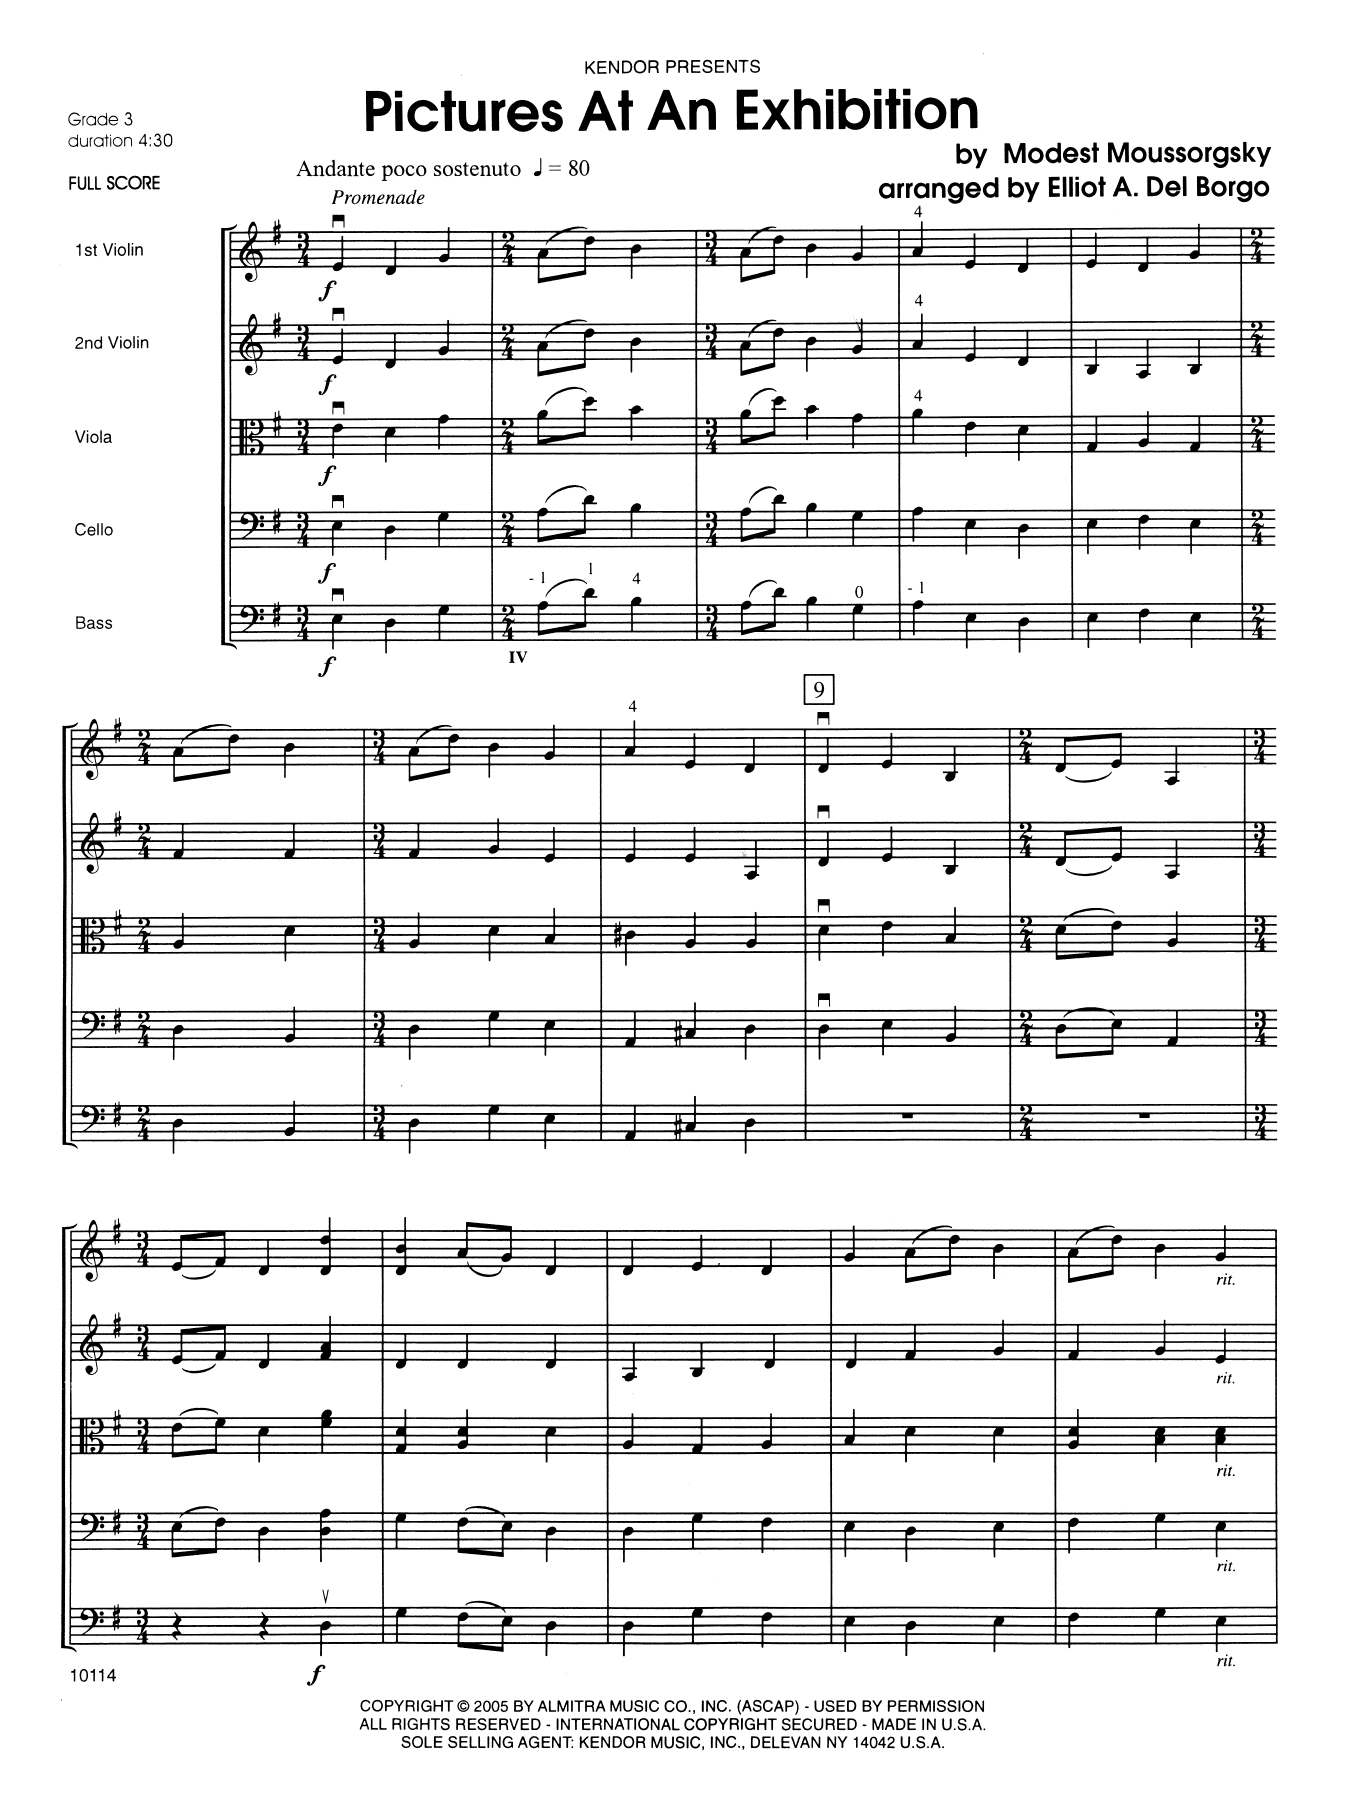 Download Modest Mussorgsky Pictures at an Exhibition - Full Score Sheet Music